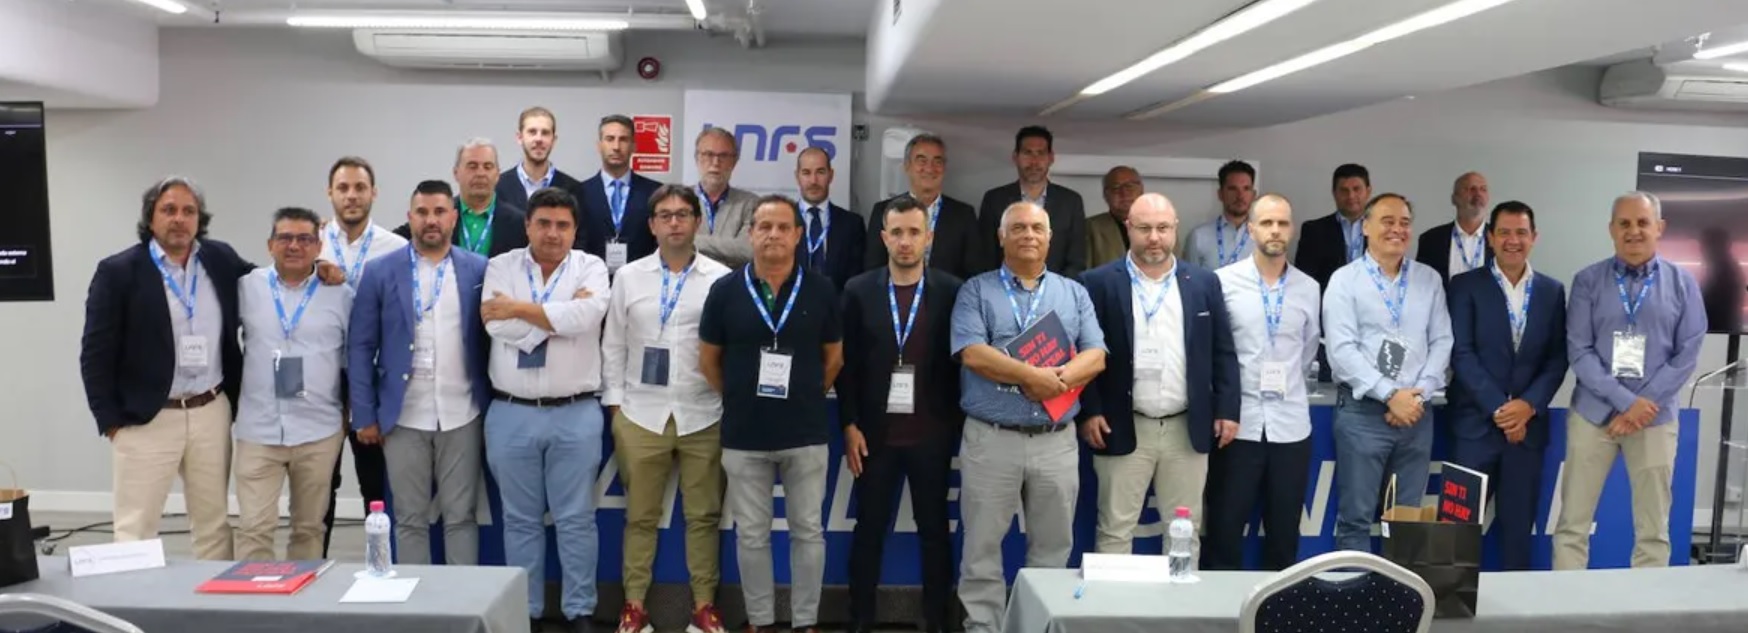 The LNFS, backed by the Popular Party, seeks the professionalisation of Spanish Futsal